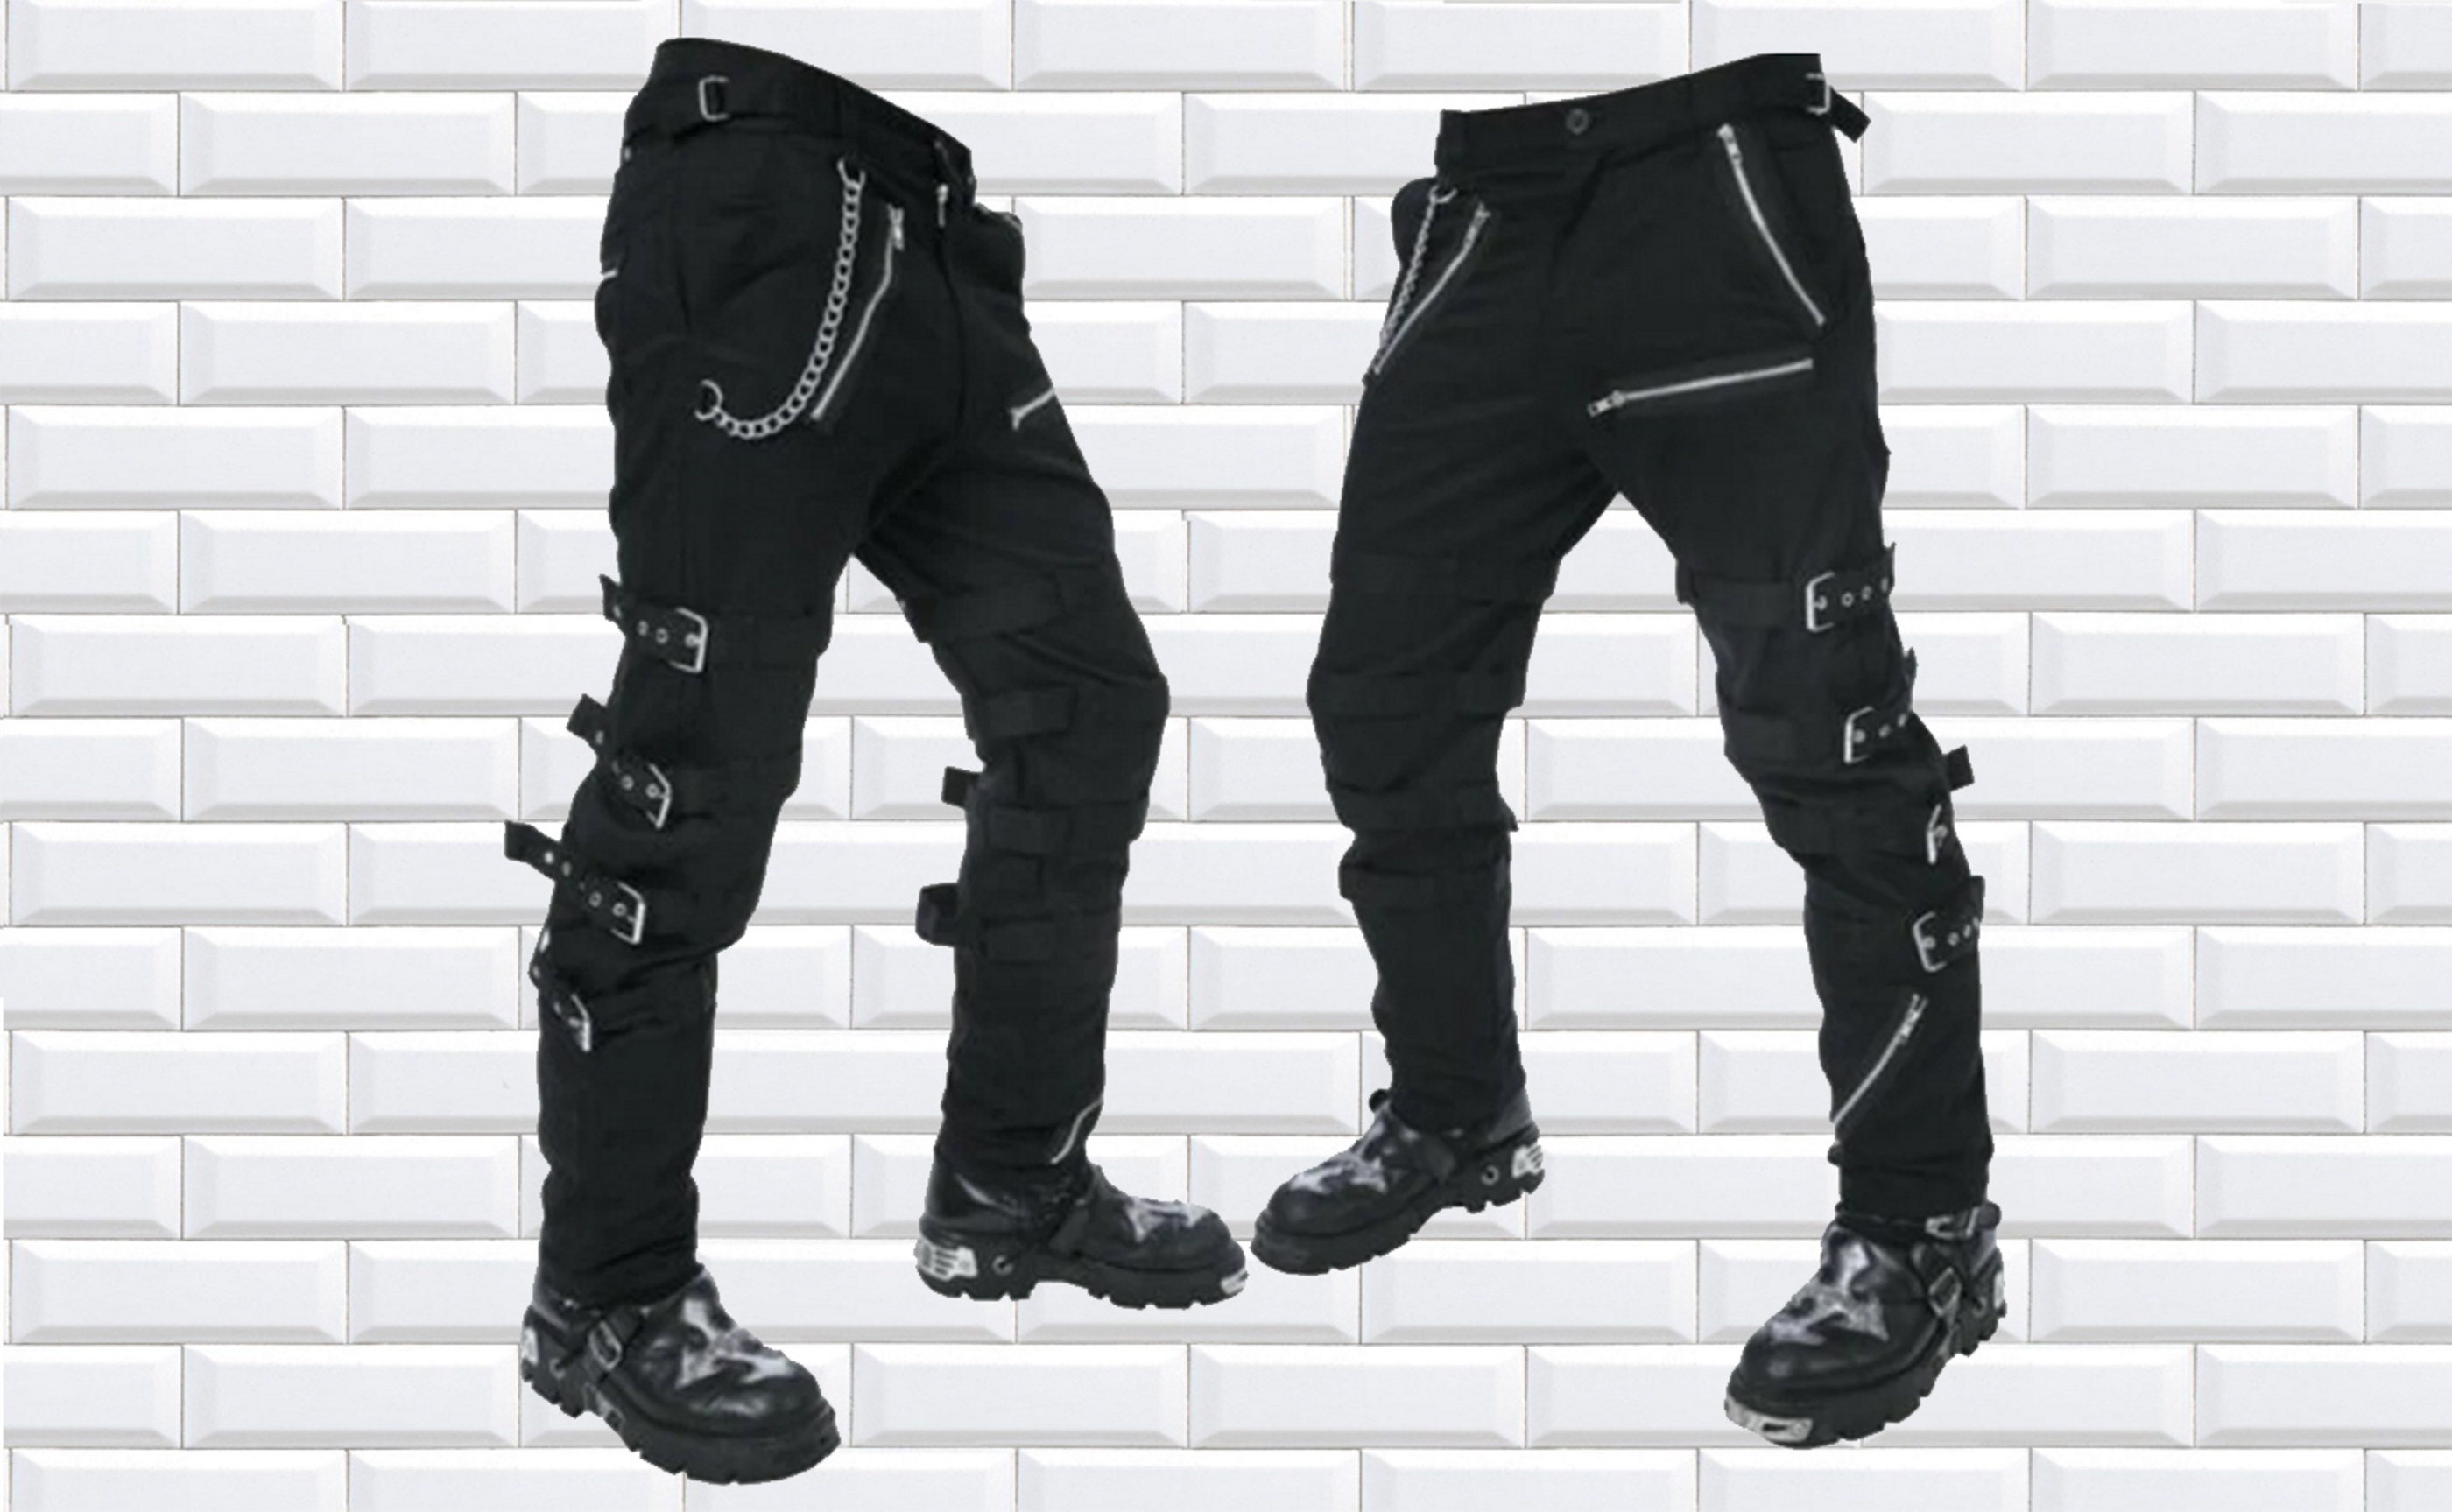 Men's Gothic Threads Reflective Pant Black Punk Buckle Zips Chain Strap  Punk Trousers With Understated Gothic Pants Hi-405-gt 